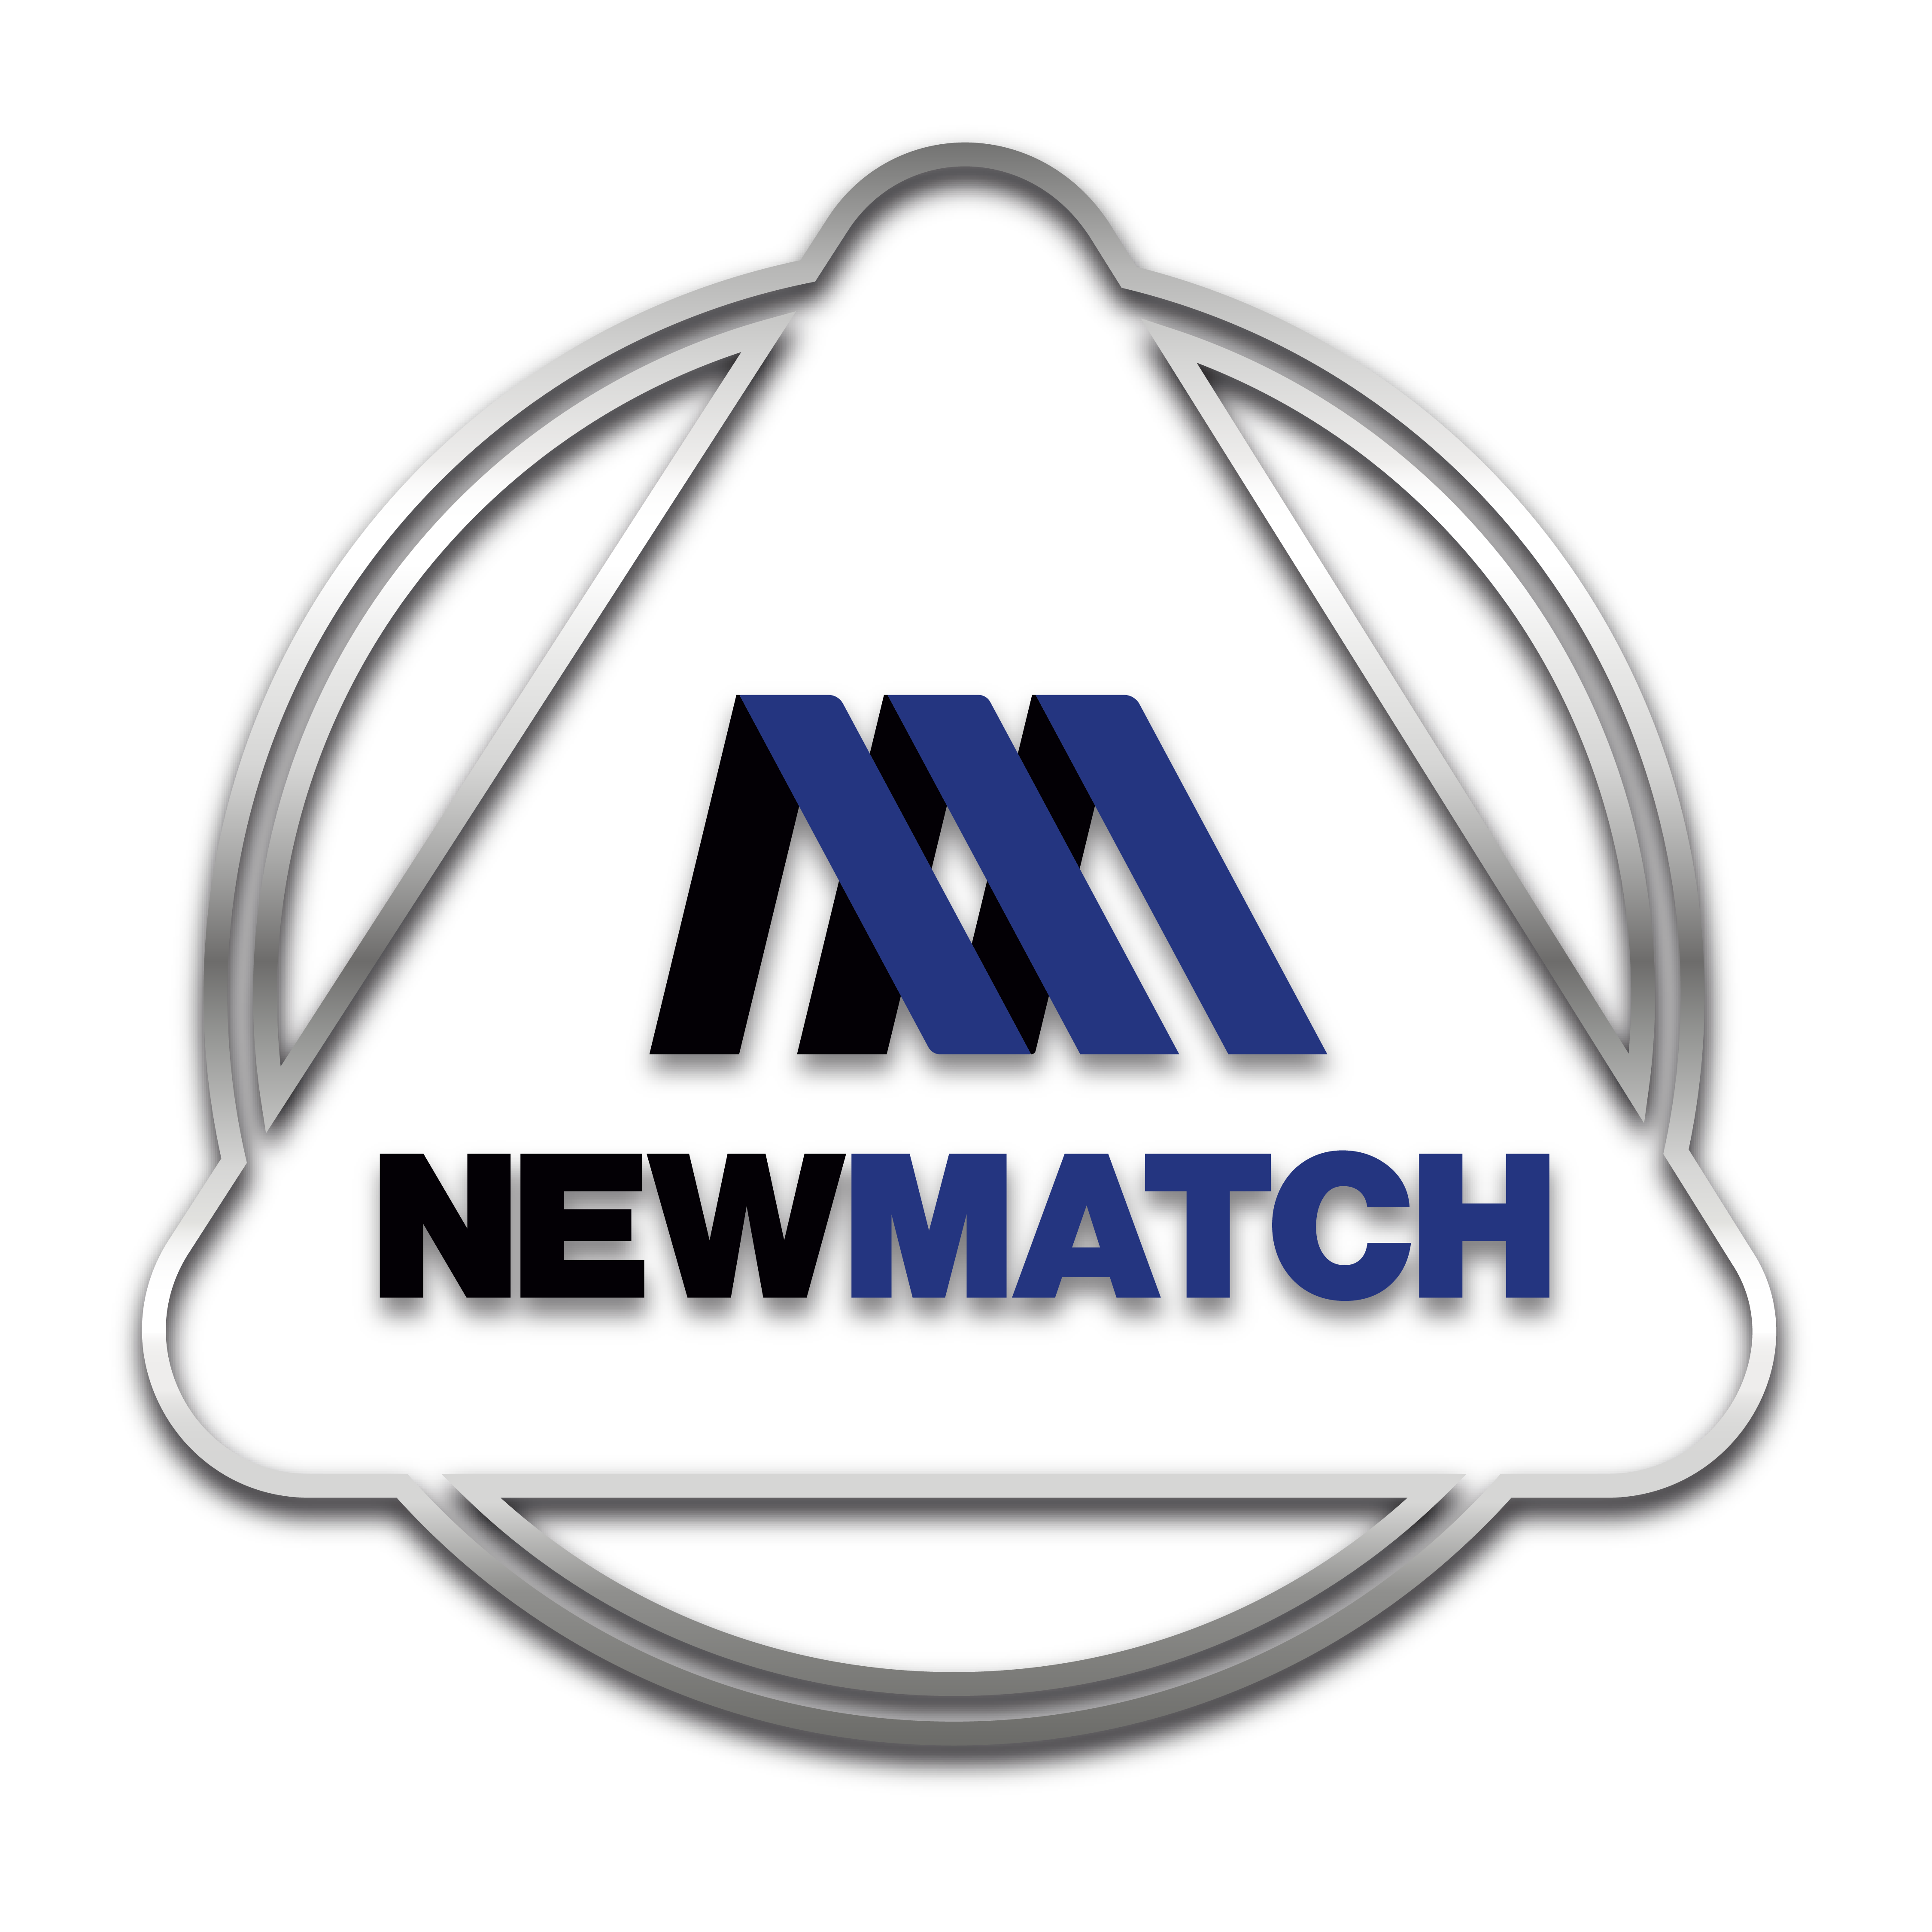 NEWMATCH S.A.S